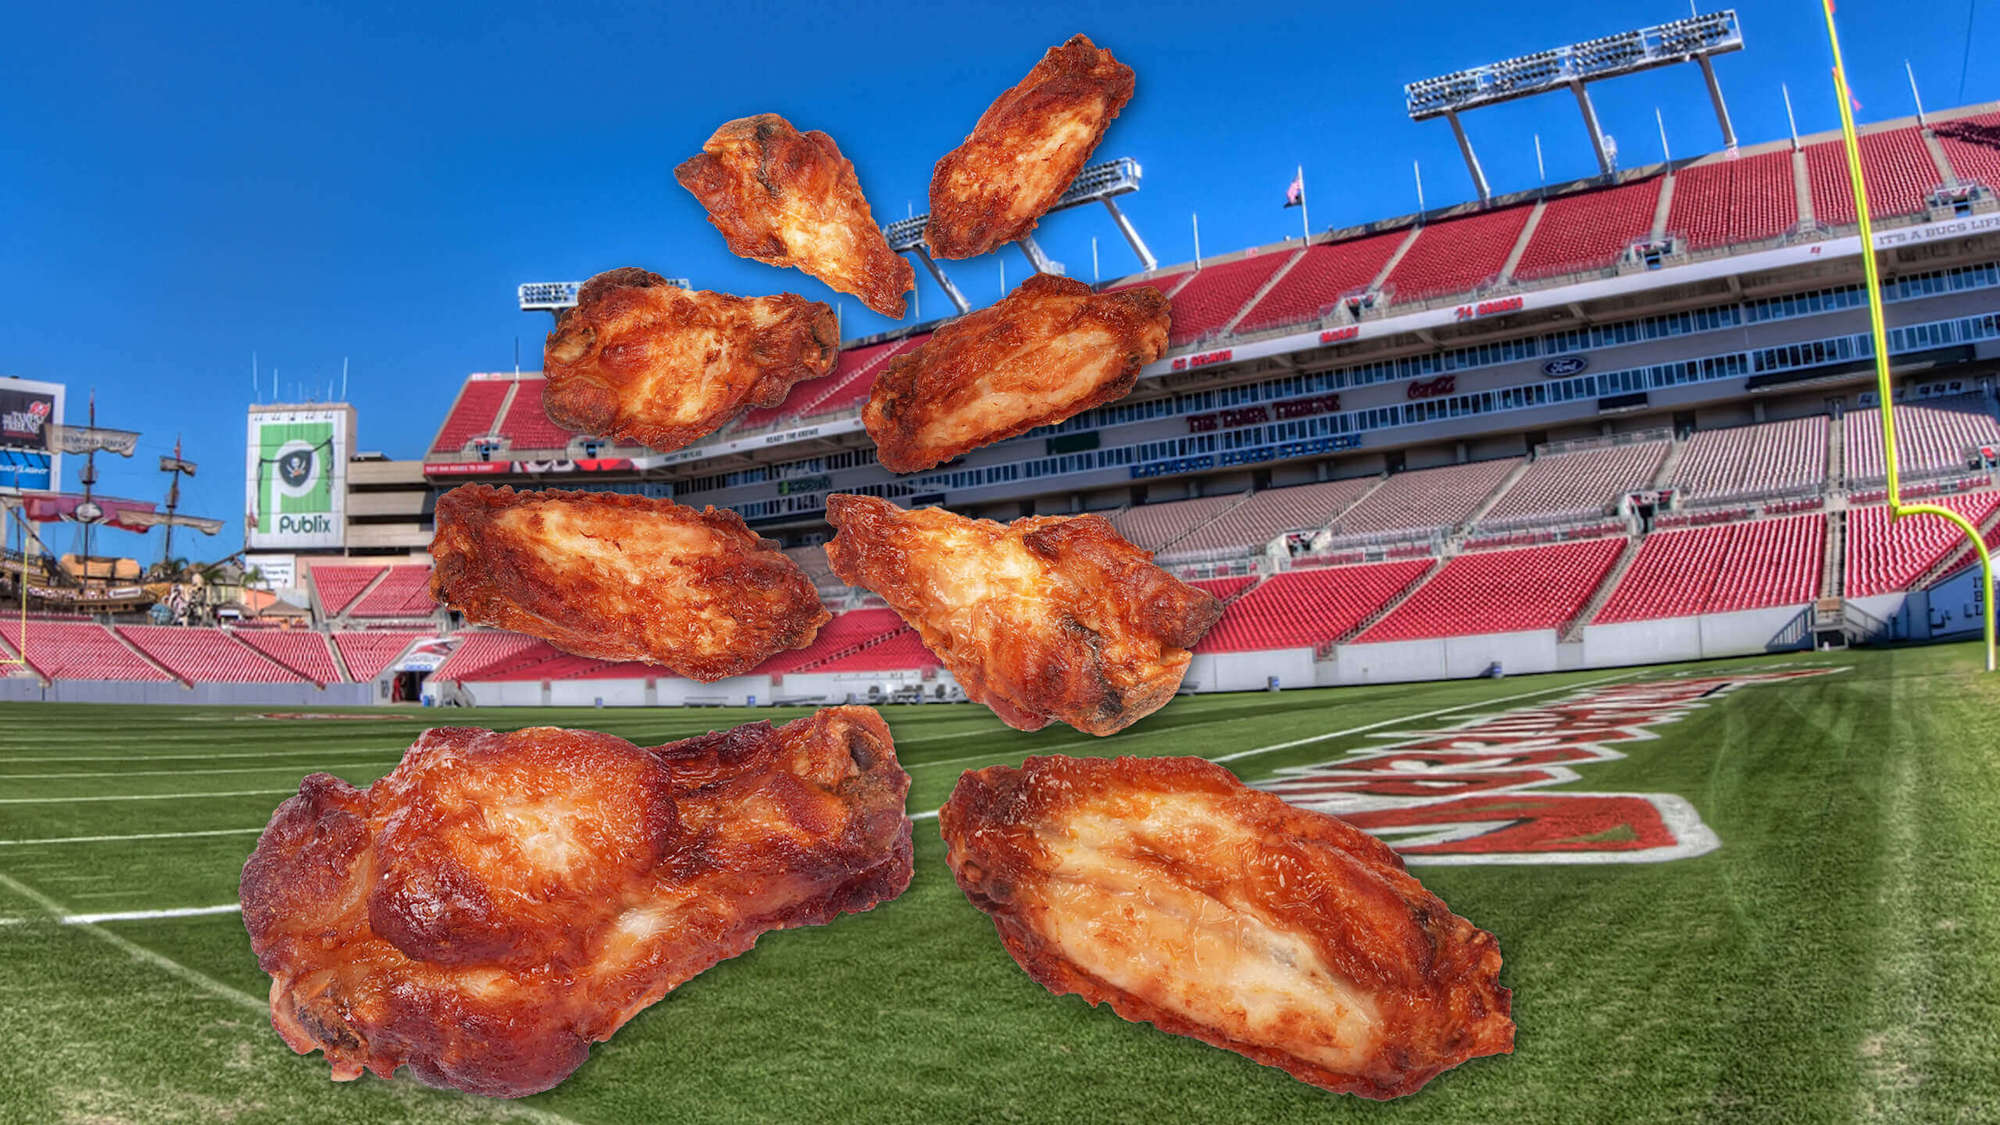 Cut outs of chicken wings fall from the sky in front of the Super Bowl stadium background. February 2021